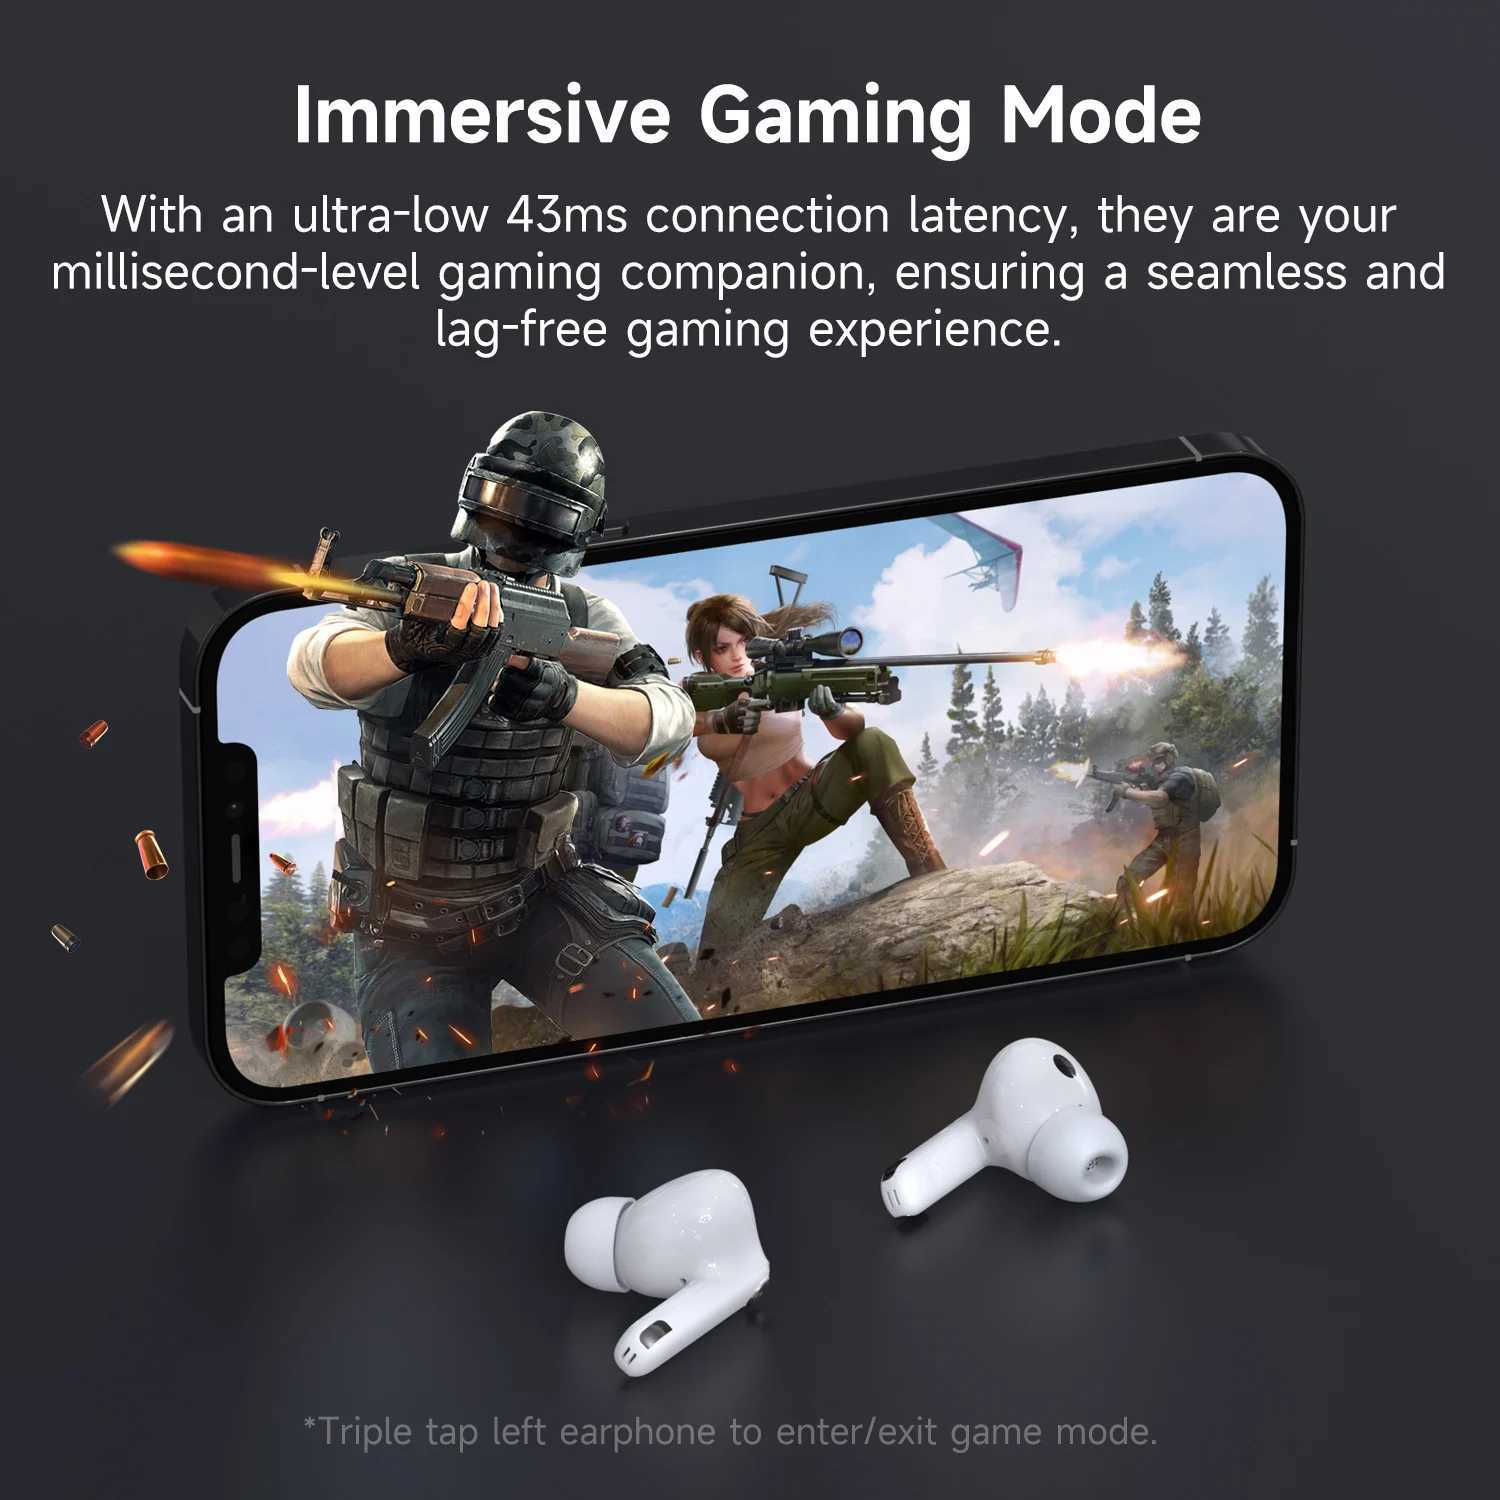 Cell Phone Earphones Oneodio SuperEQ S10 ANC Bluetooth 5.4 Headphones Wireless TWS Active Noise Cancellation Headphones with ENC Microphone Gaming Mode J240508